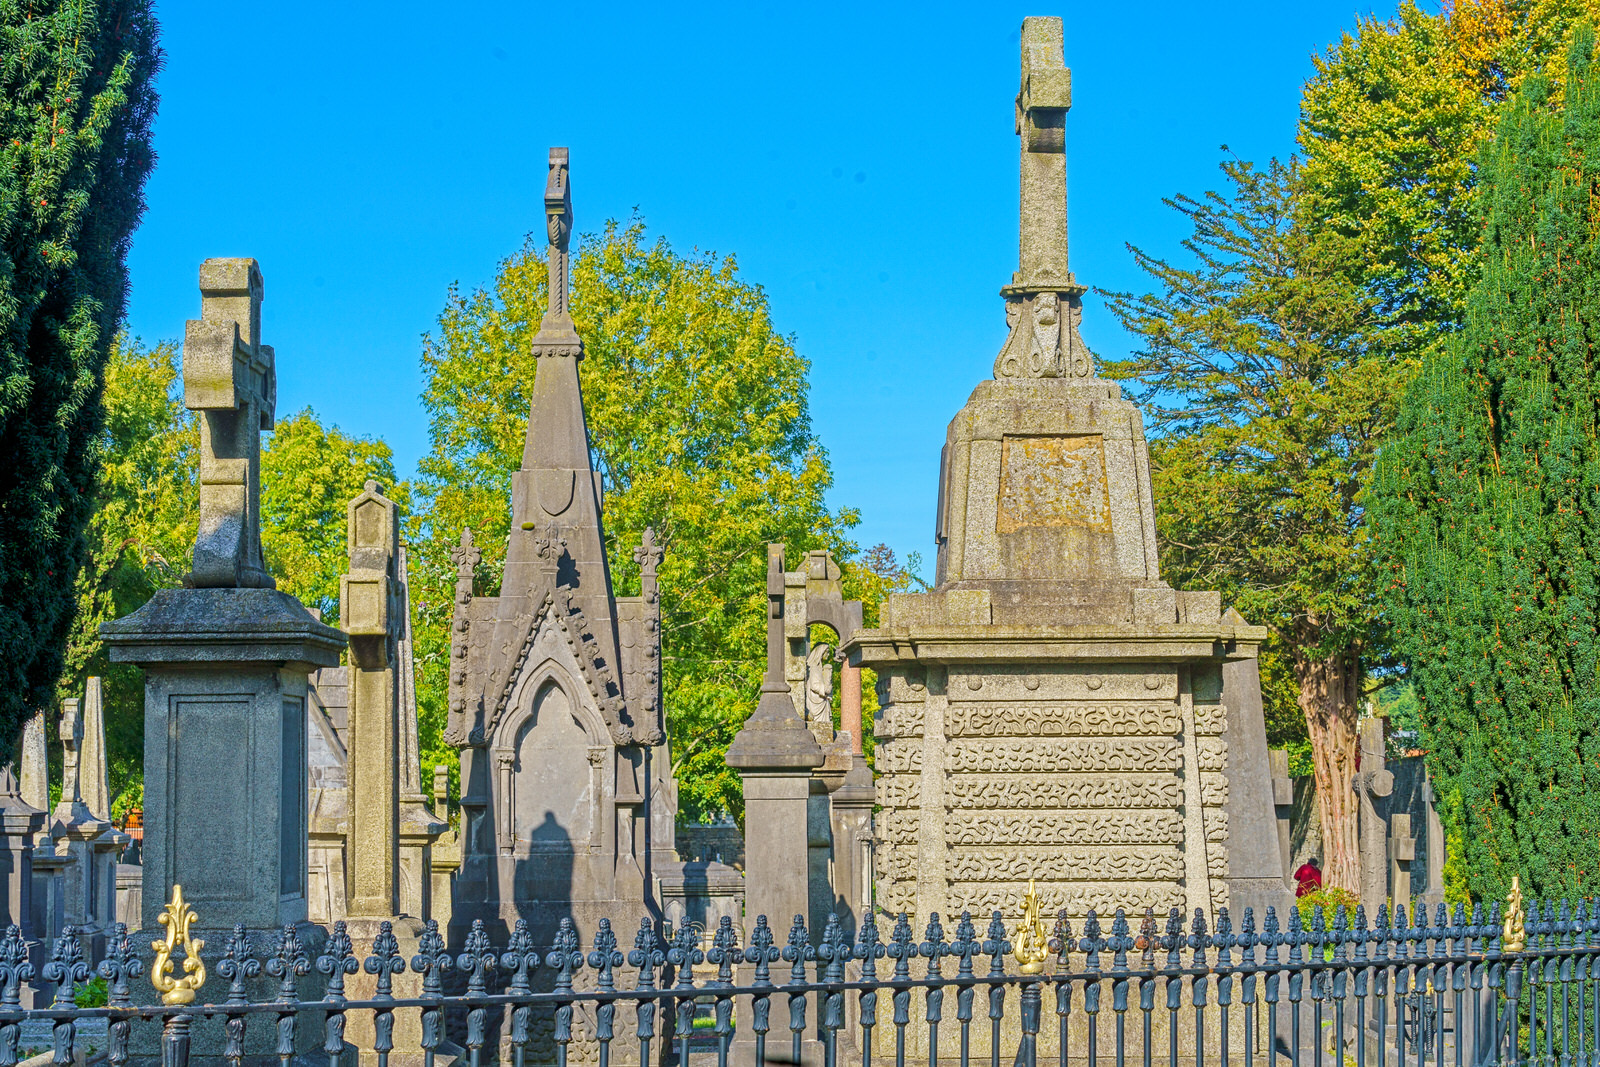 THE OLDER SECTION OF GLASNEVIN CEMETERY [I USED A SONY 70-200MM GM LENS] 016